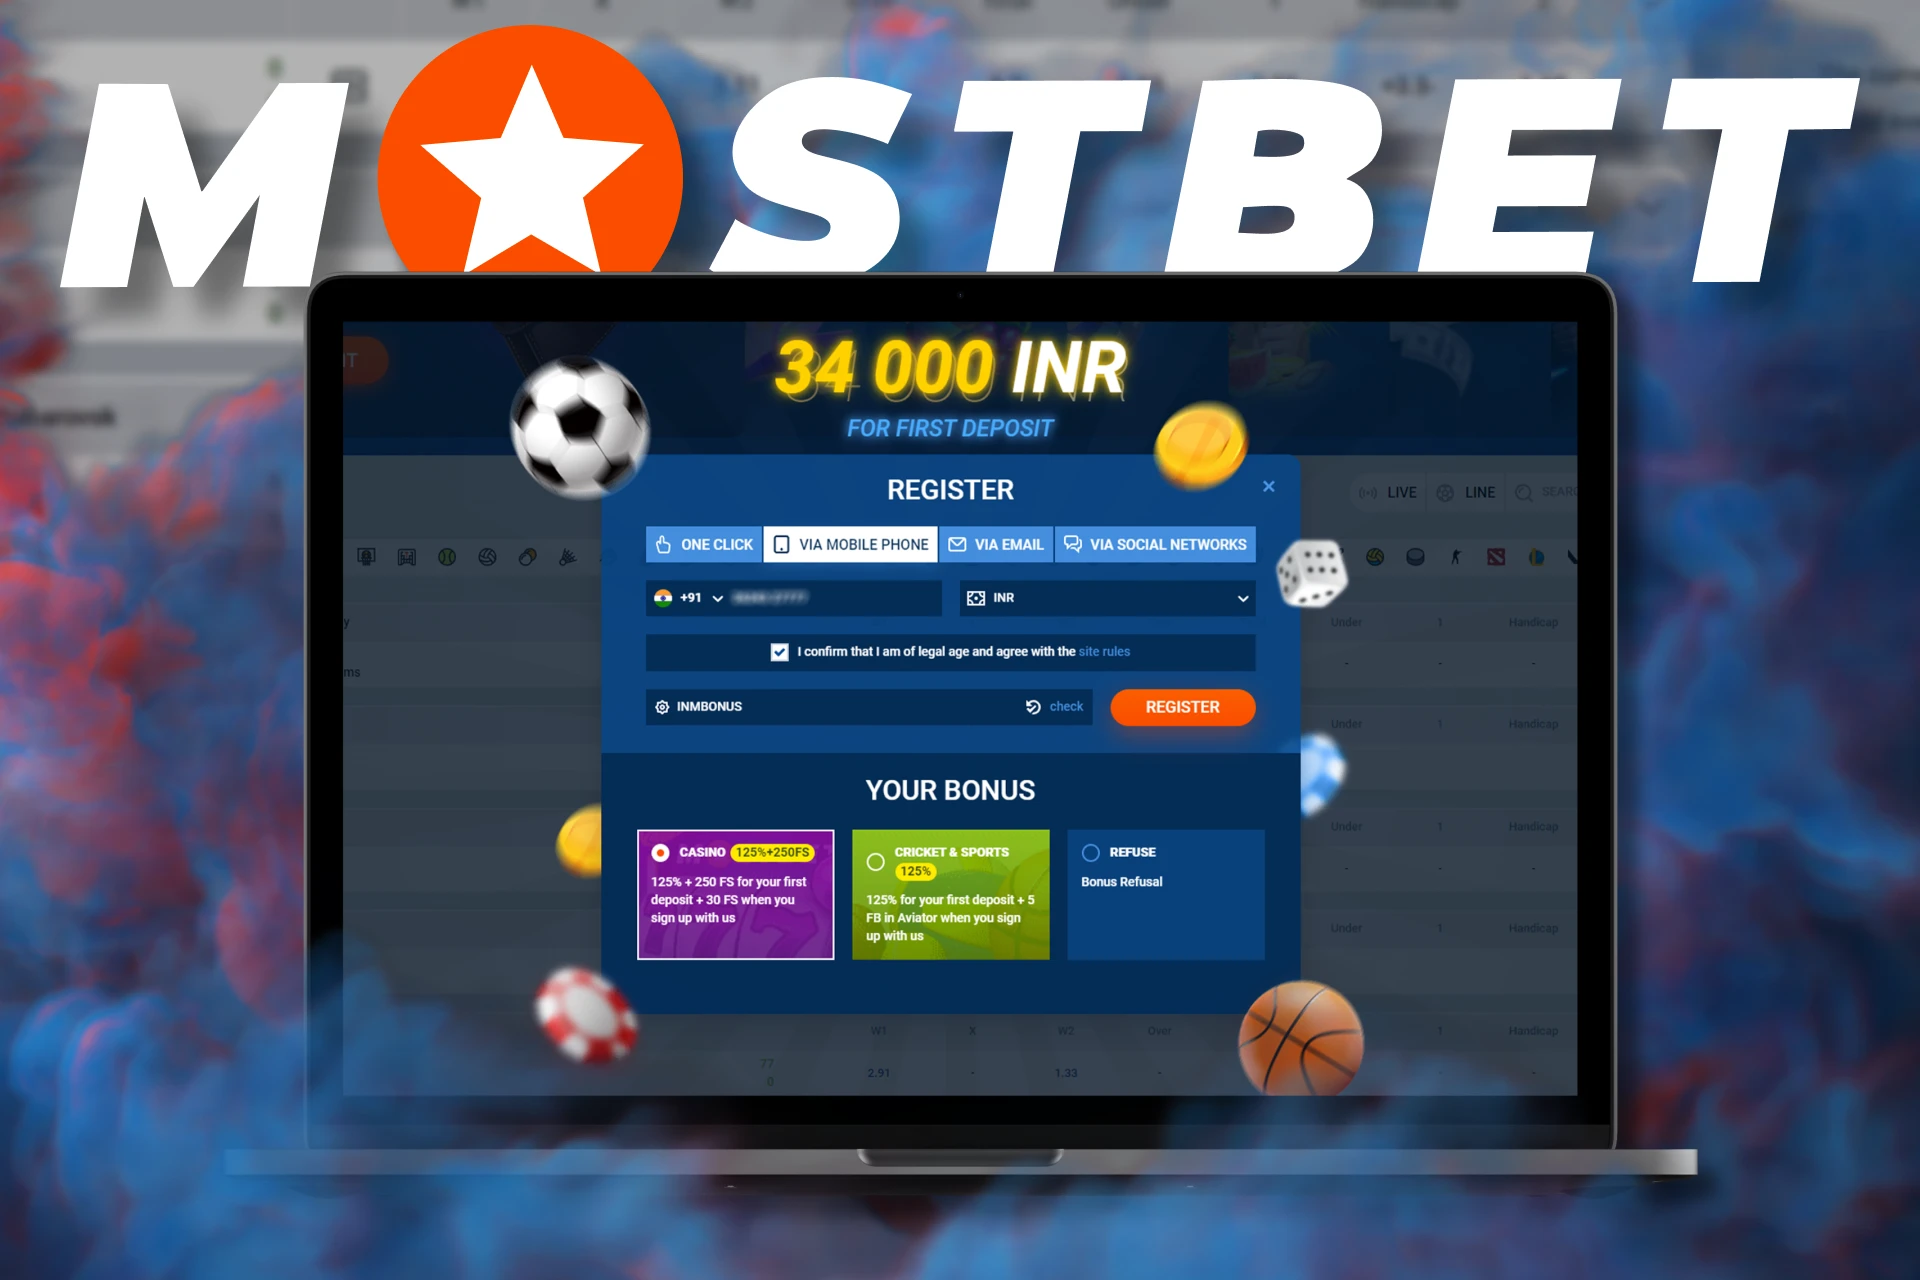 Sign up for Mostbet via your phone number.